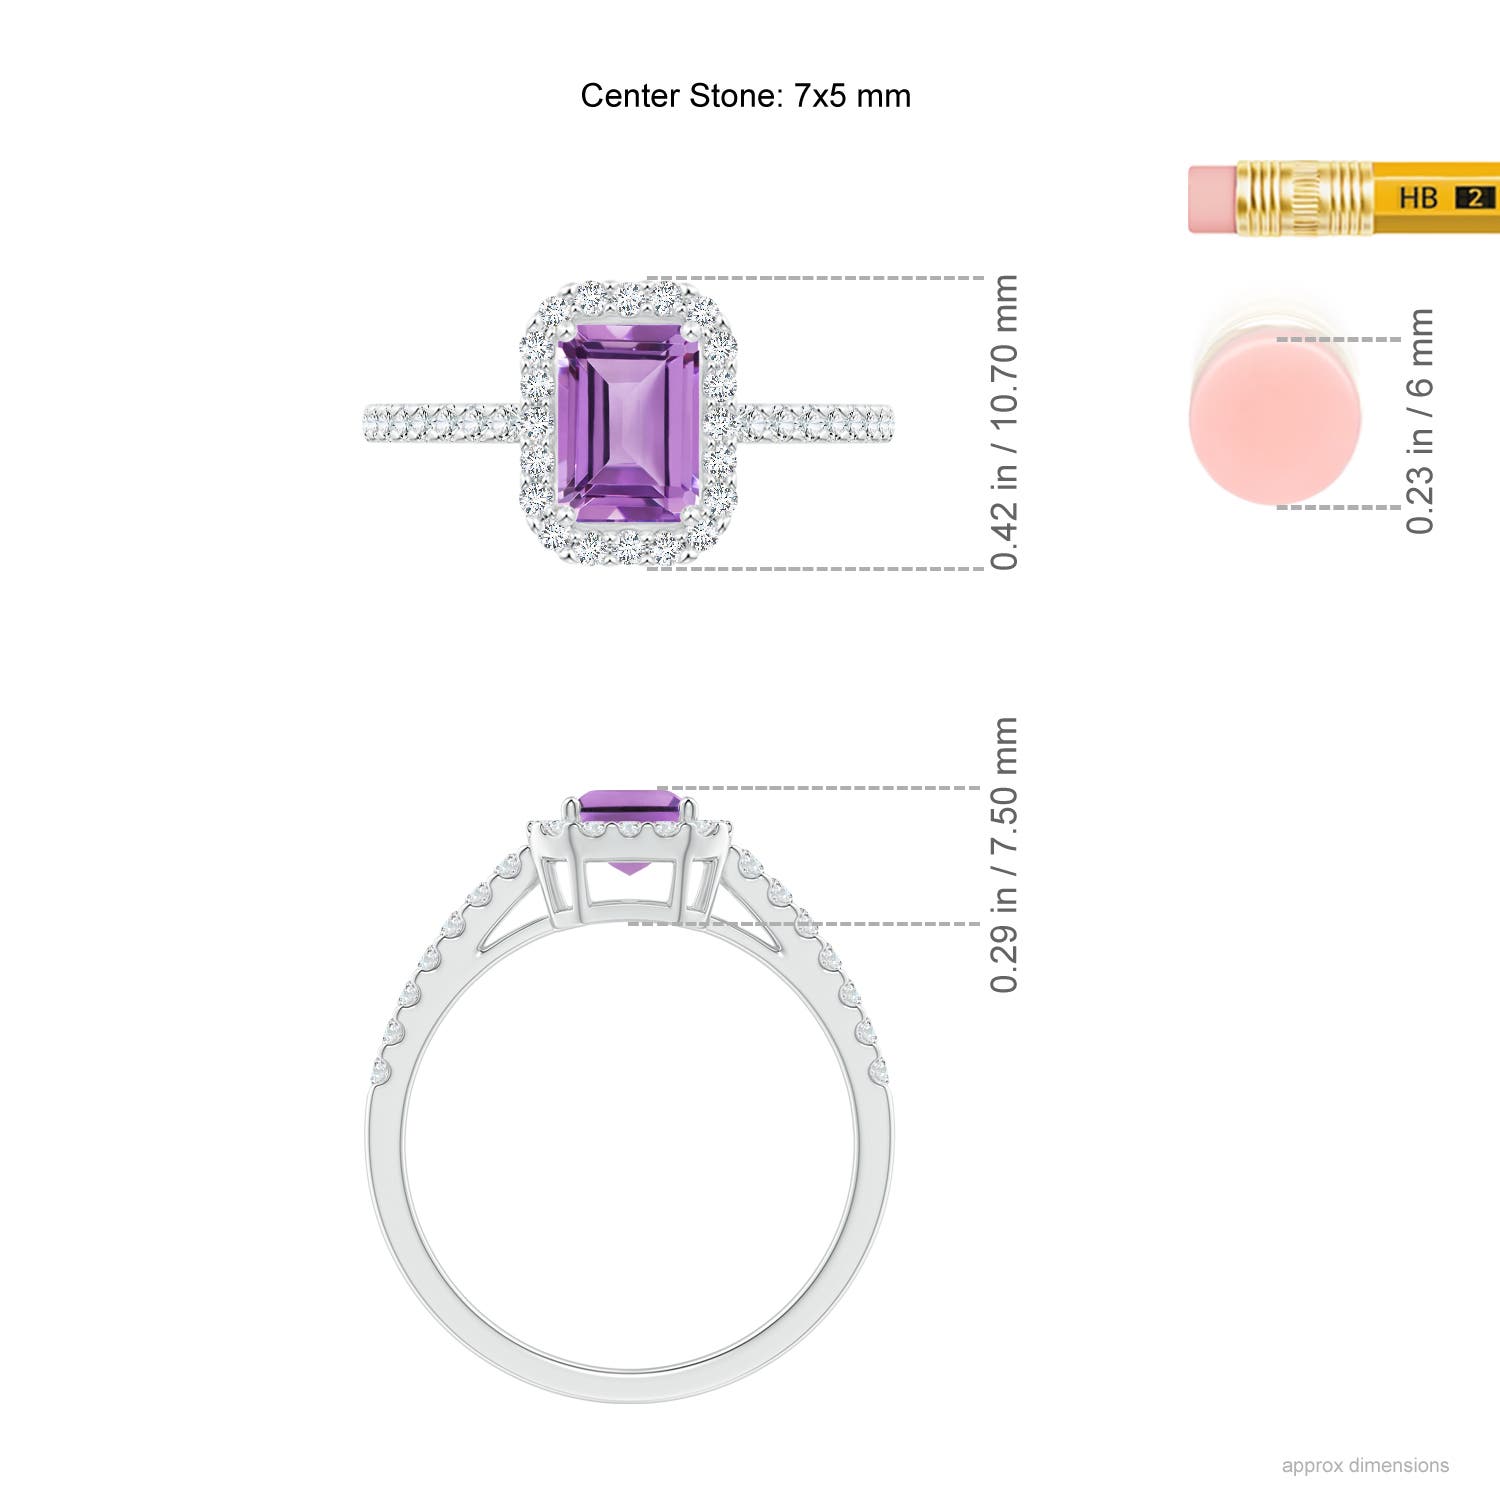 A - Amethyst / 1.23 CT / 14 KT White Gold